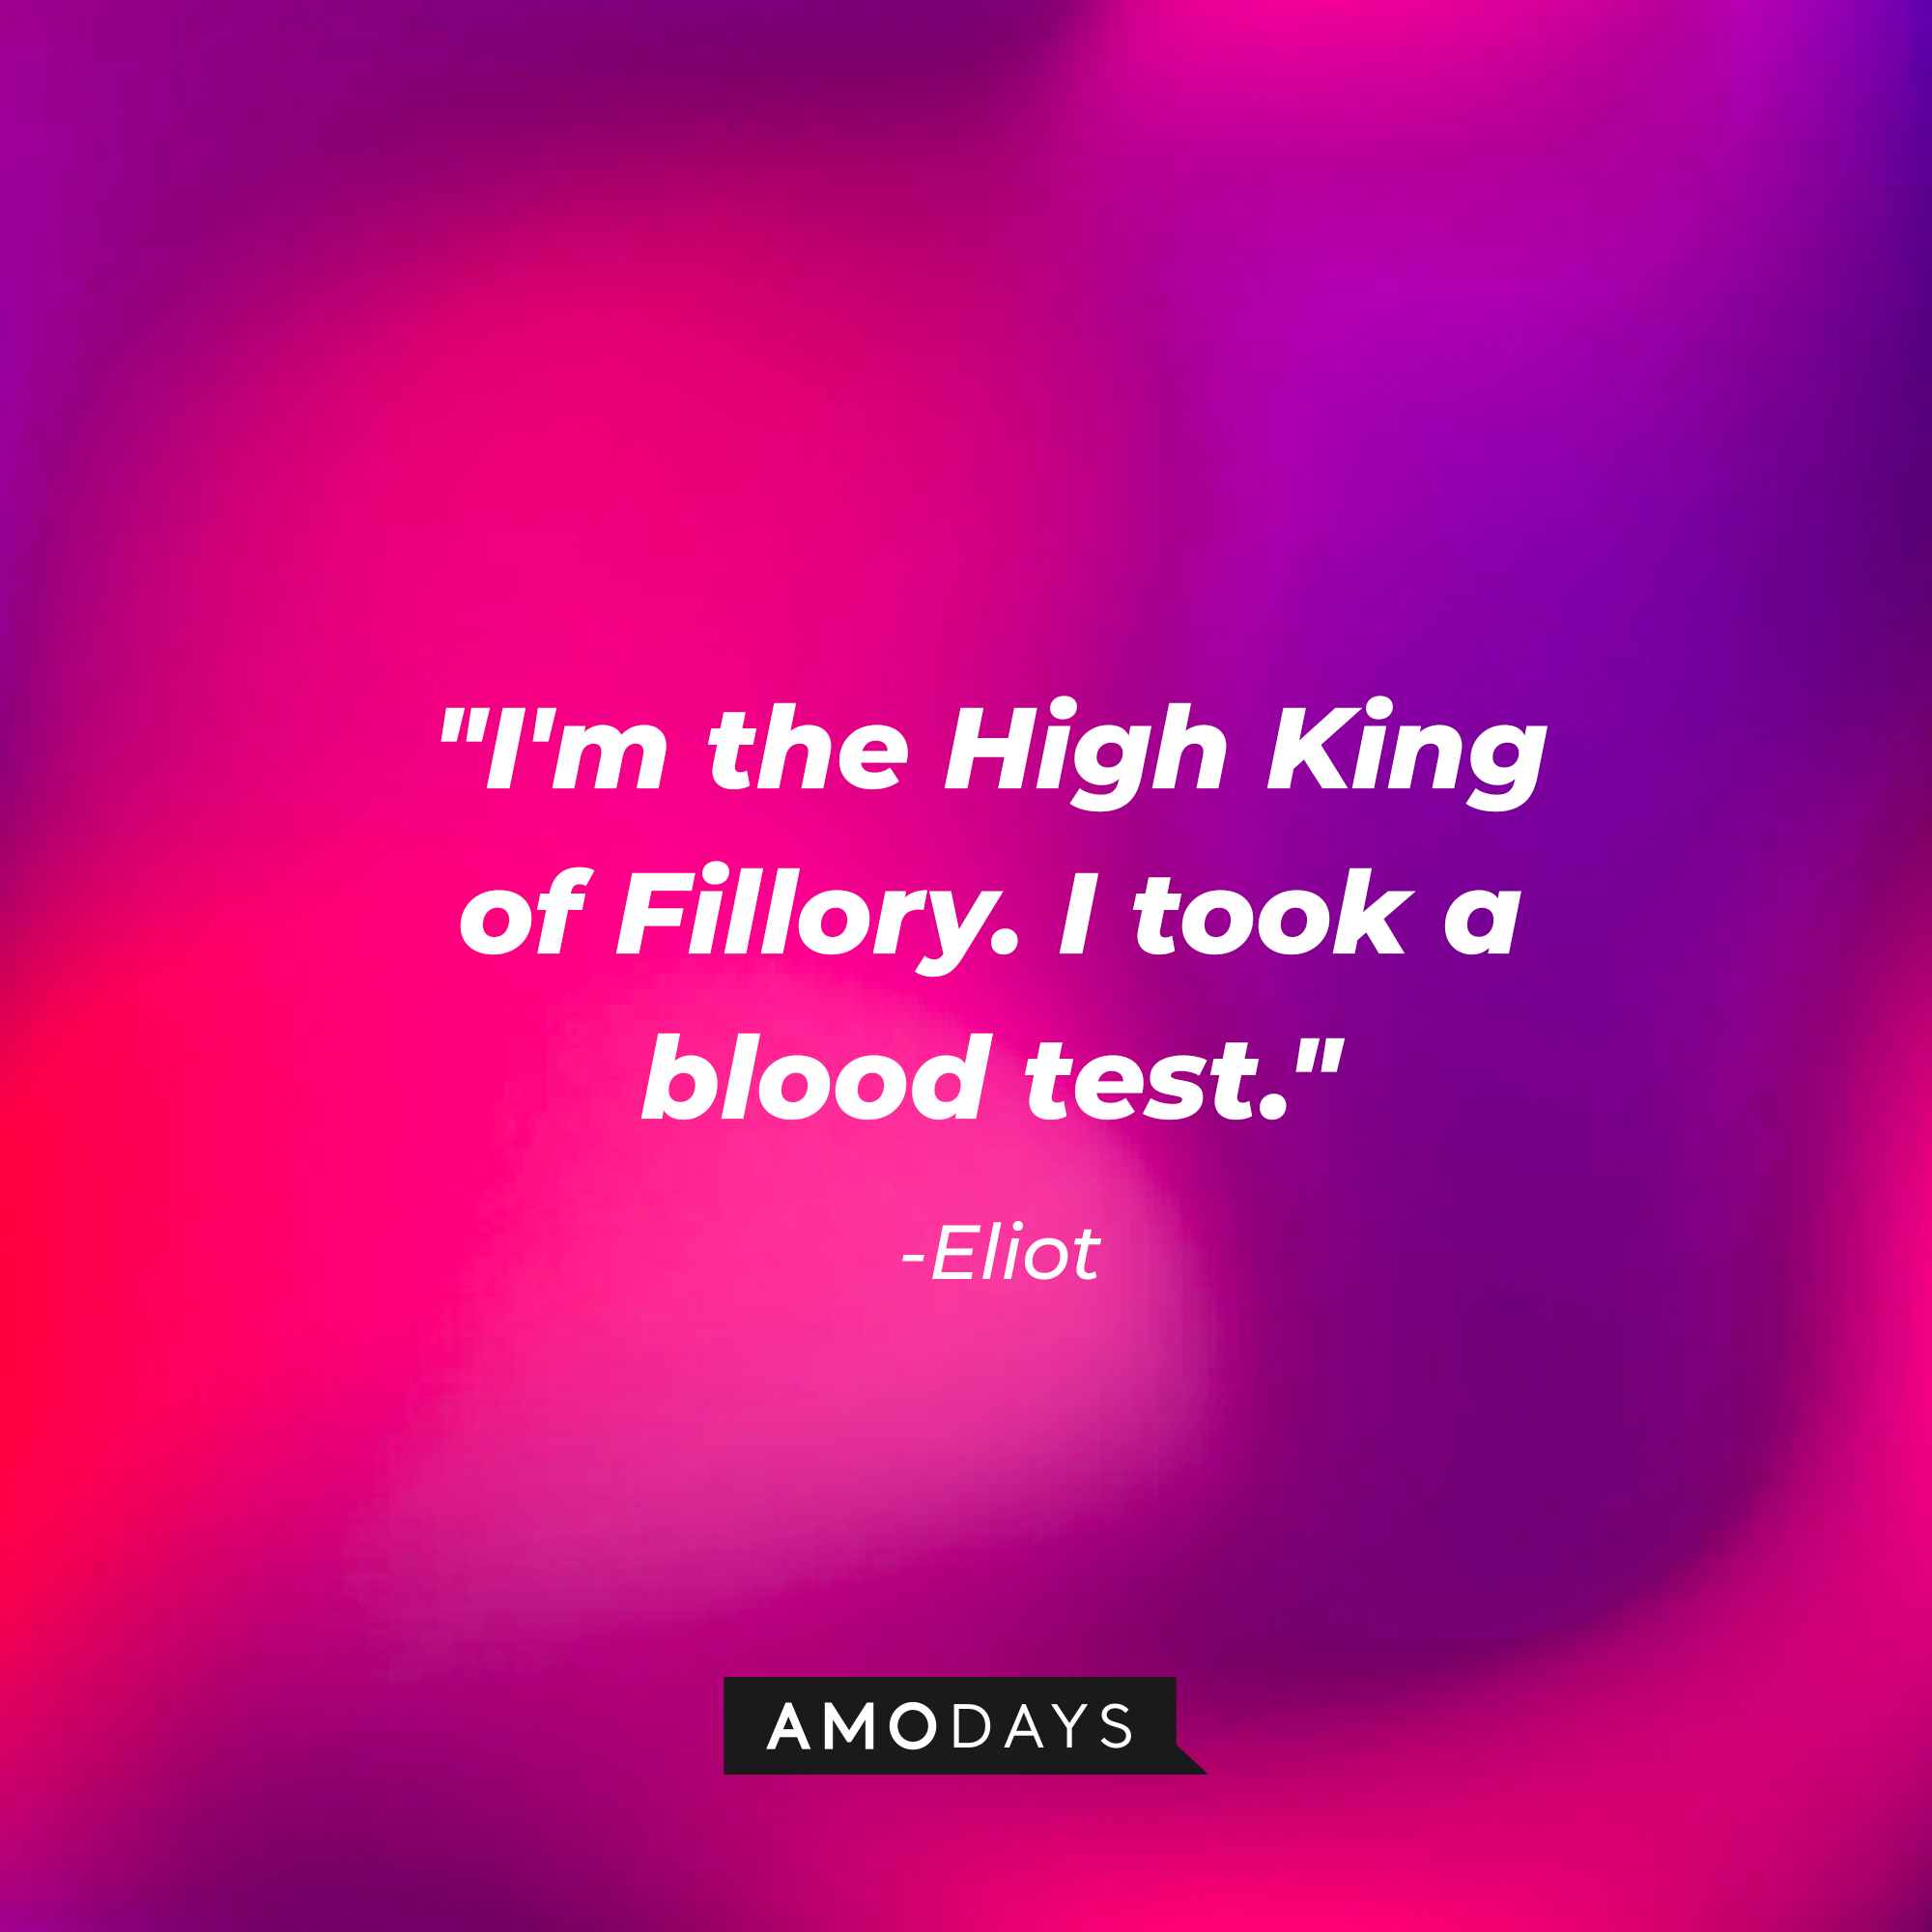 Eliot’s quotes: "I'm the High King of Fillory. I took a blood test." | Source: AmoDays